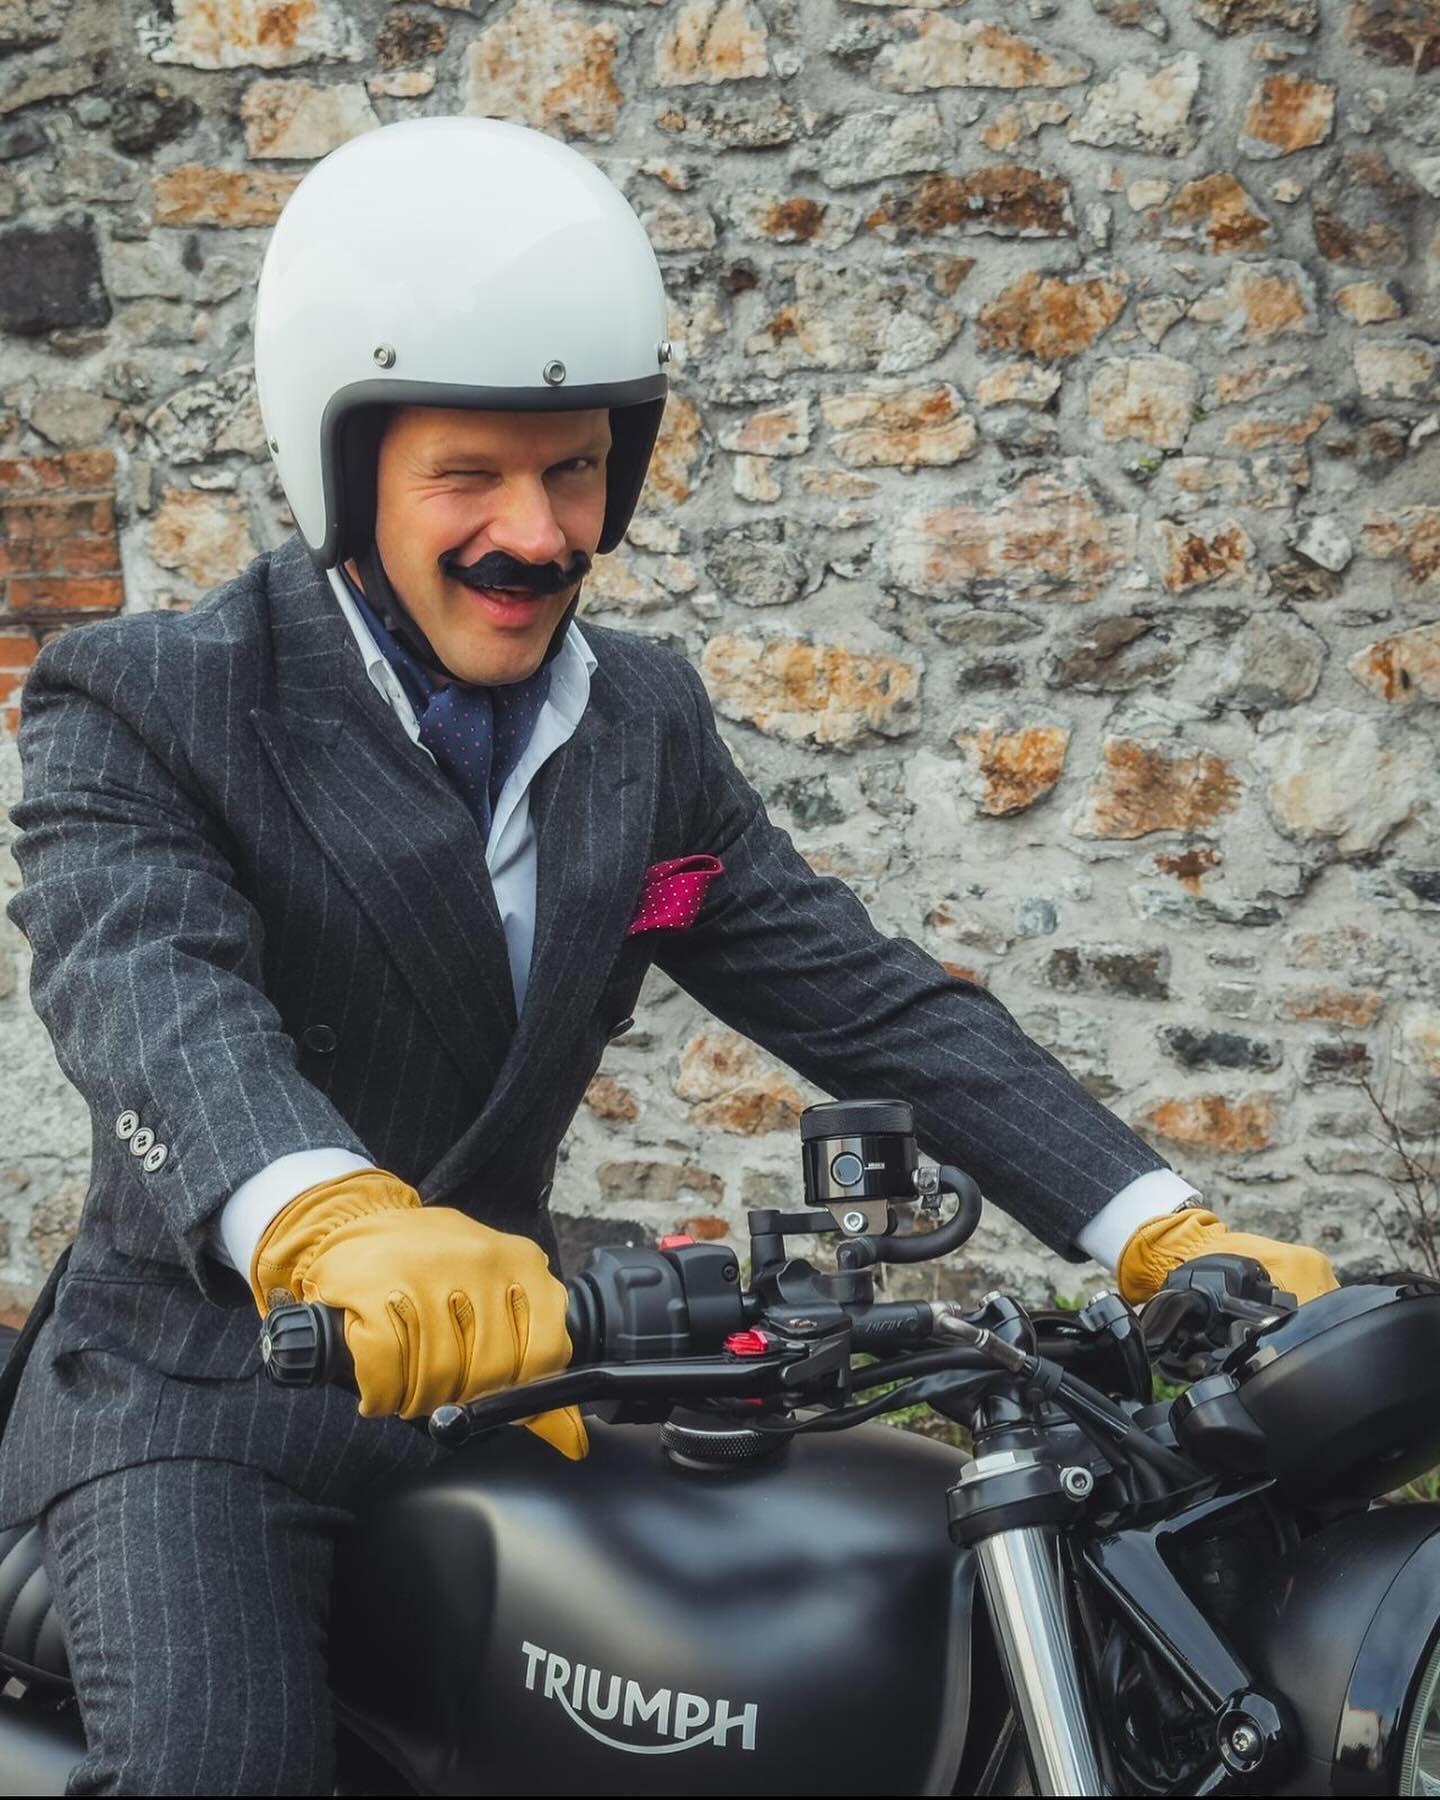 One of our loyal customers riding for a great cause.  Wearing one of our suits of course!
https://gfolk.me/JaroKratochvil570087
Donations welcome